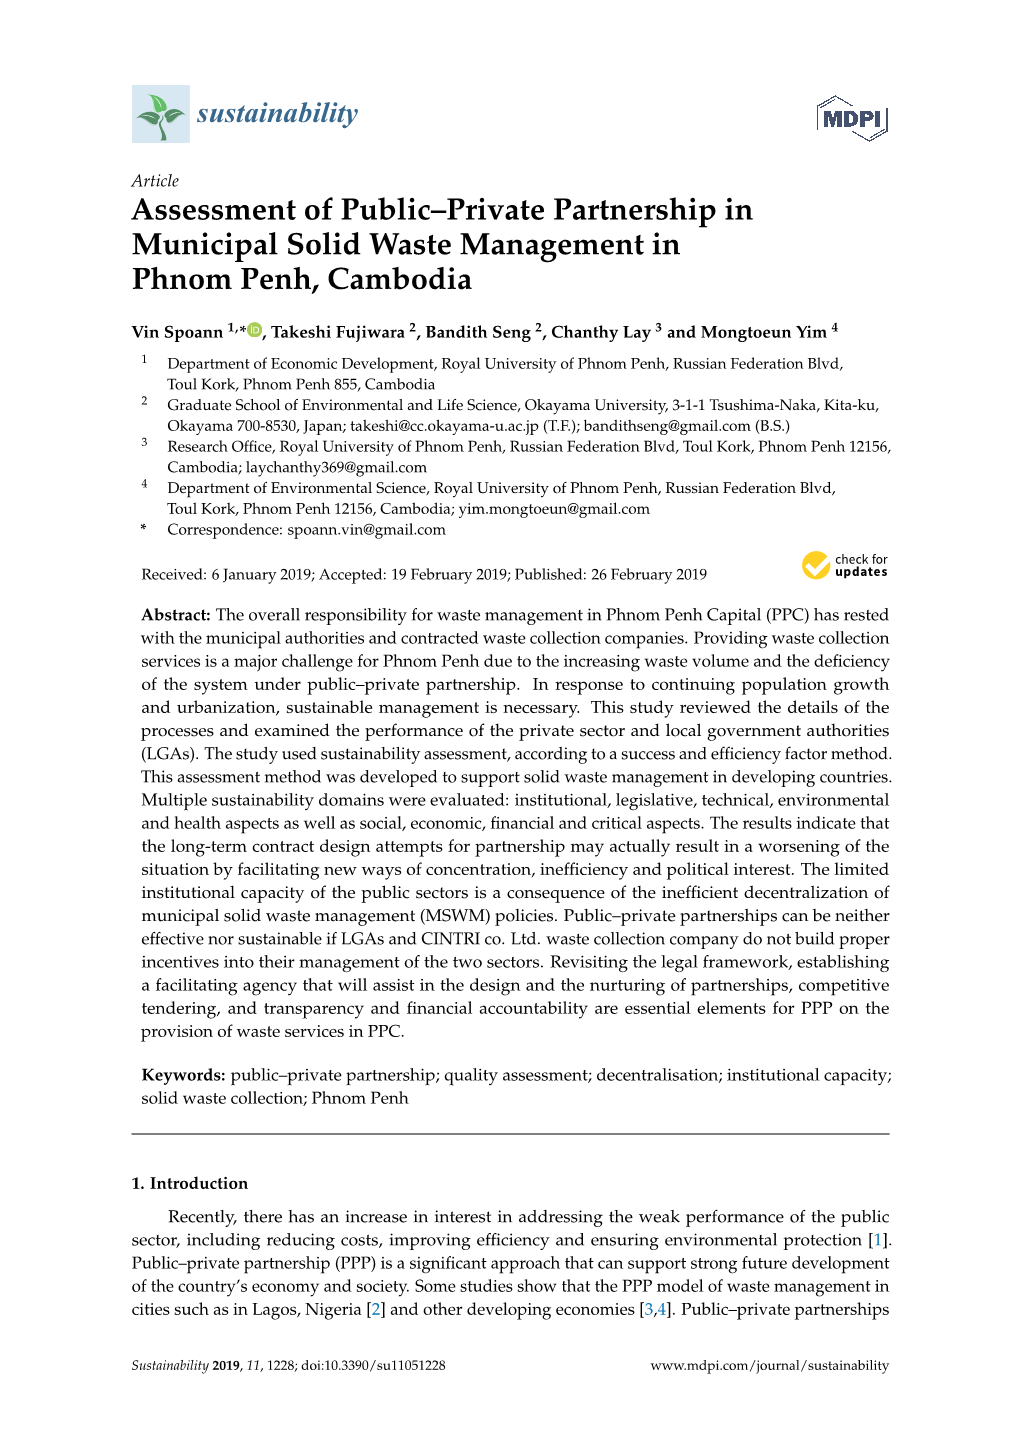 Assessment of Public–Private Partnership in Municipal Solid Waste Management in Phnom Penh, Cambodia